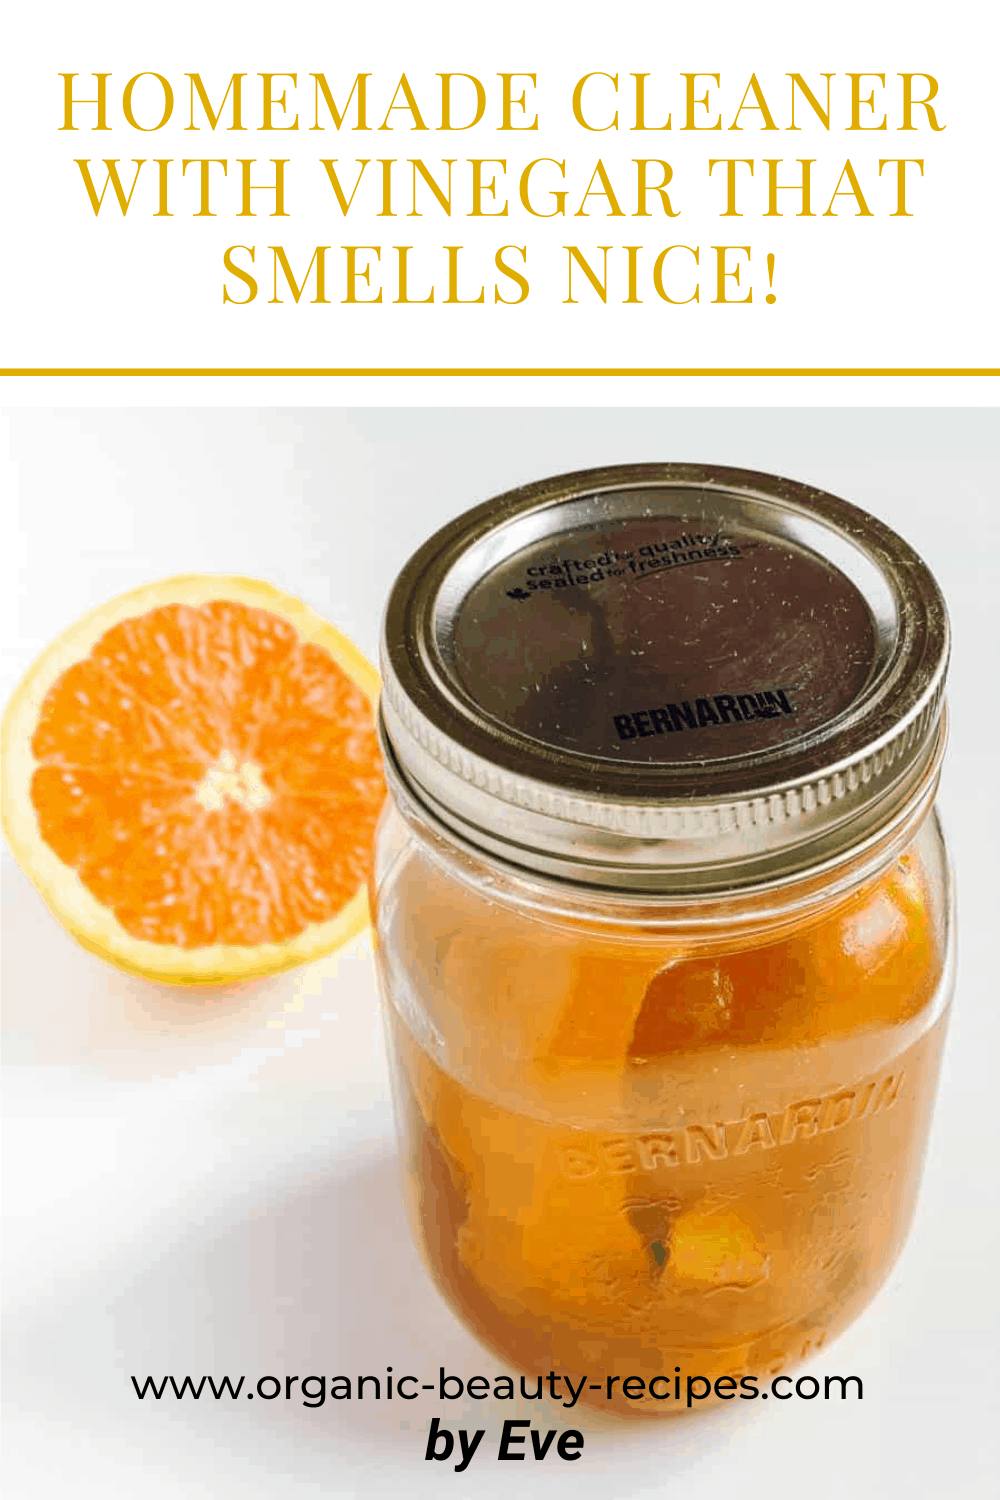 https://www.organic-beauty-recipes.com/wp-content/uploads/2020/04/Homemade-Cleaner-With-Vinegar-That-Smells-Nice.png